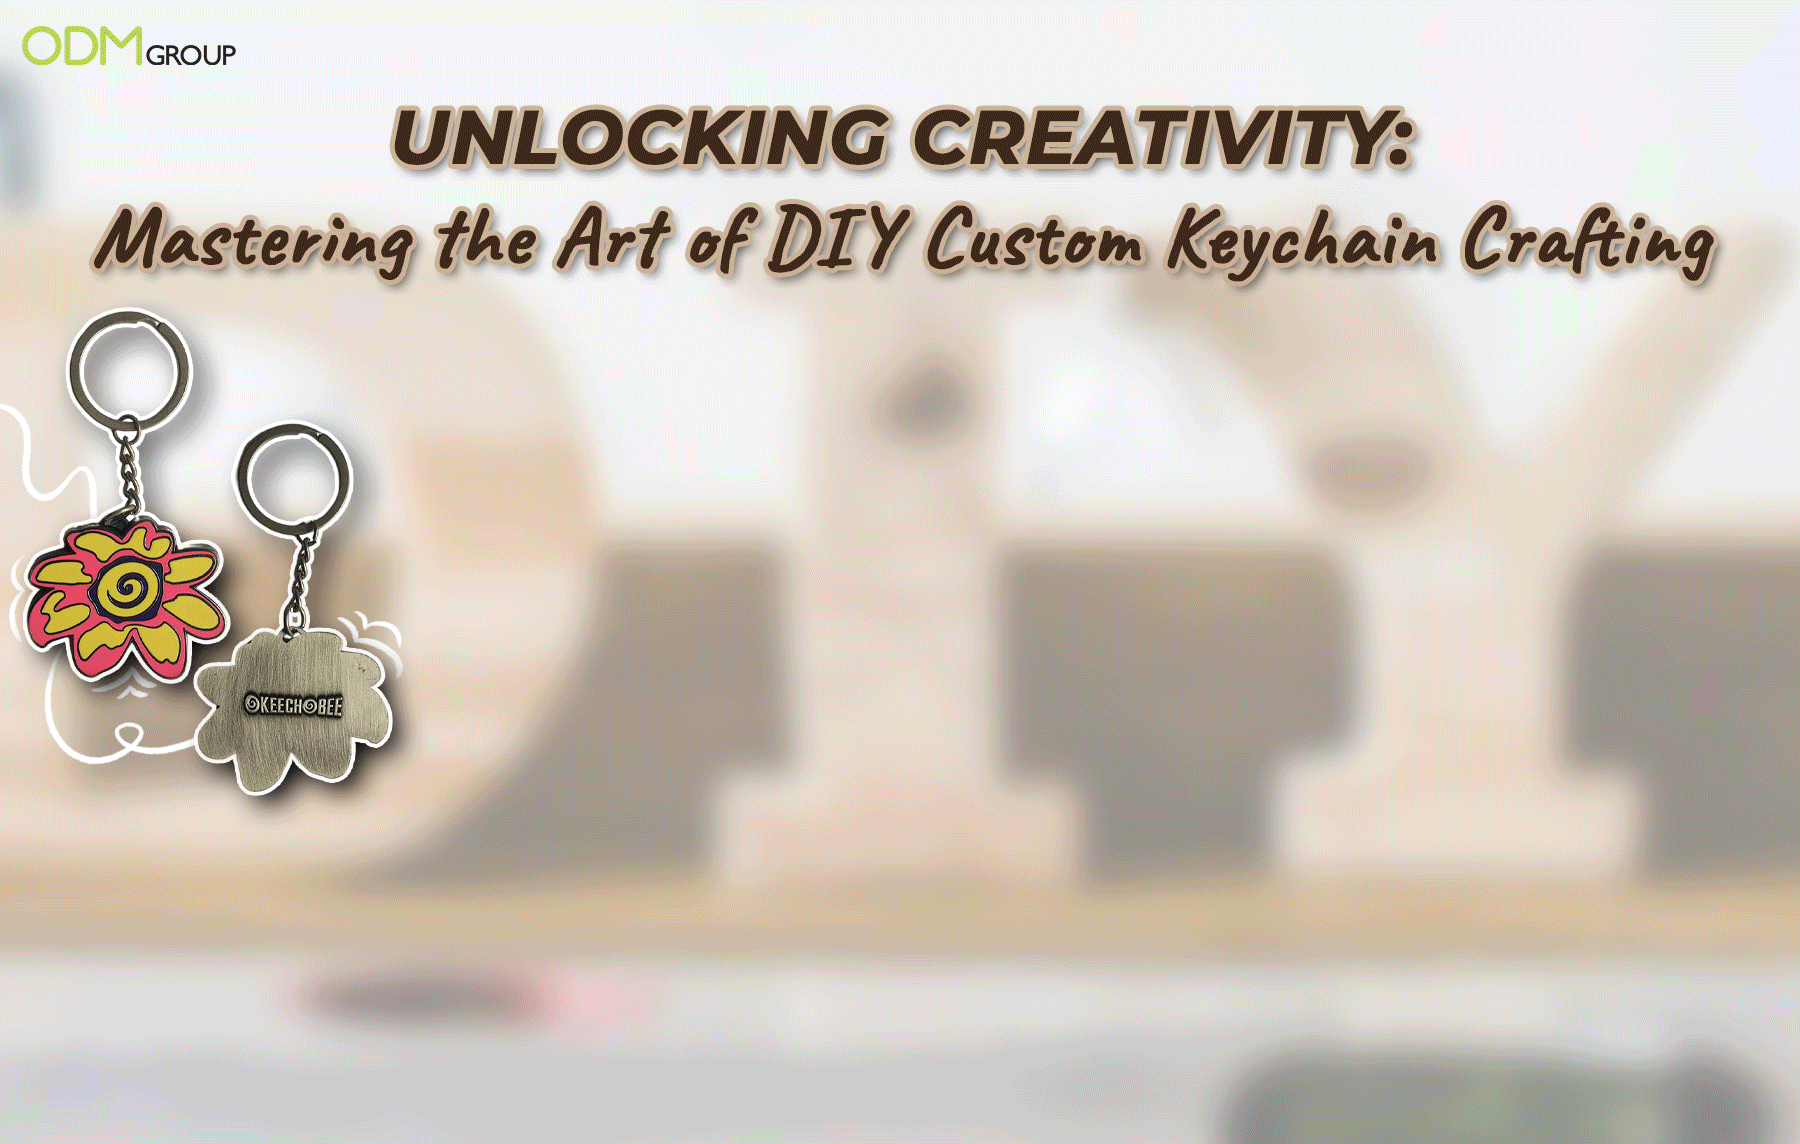 Custom keychain crafting by ODM Group featuring flower-shaped keychains.